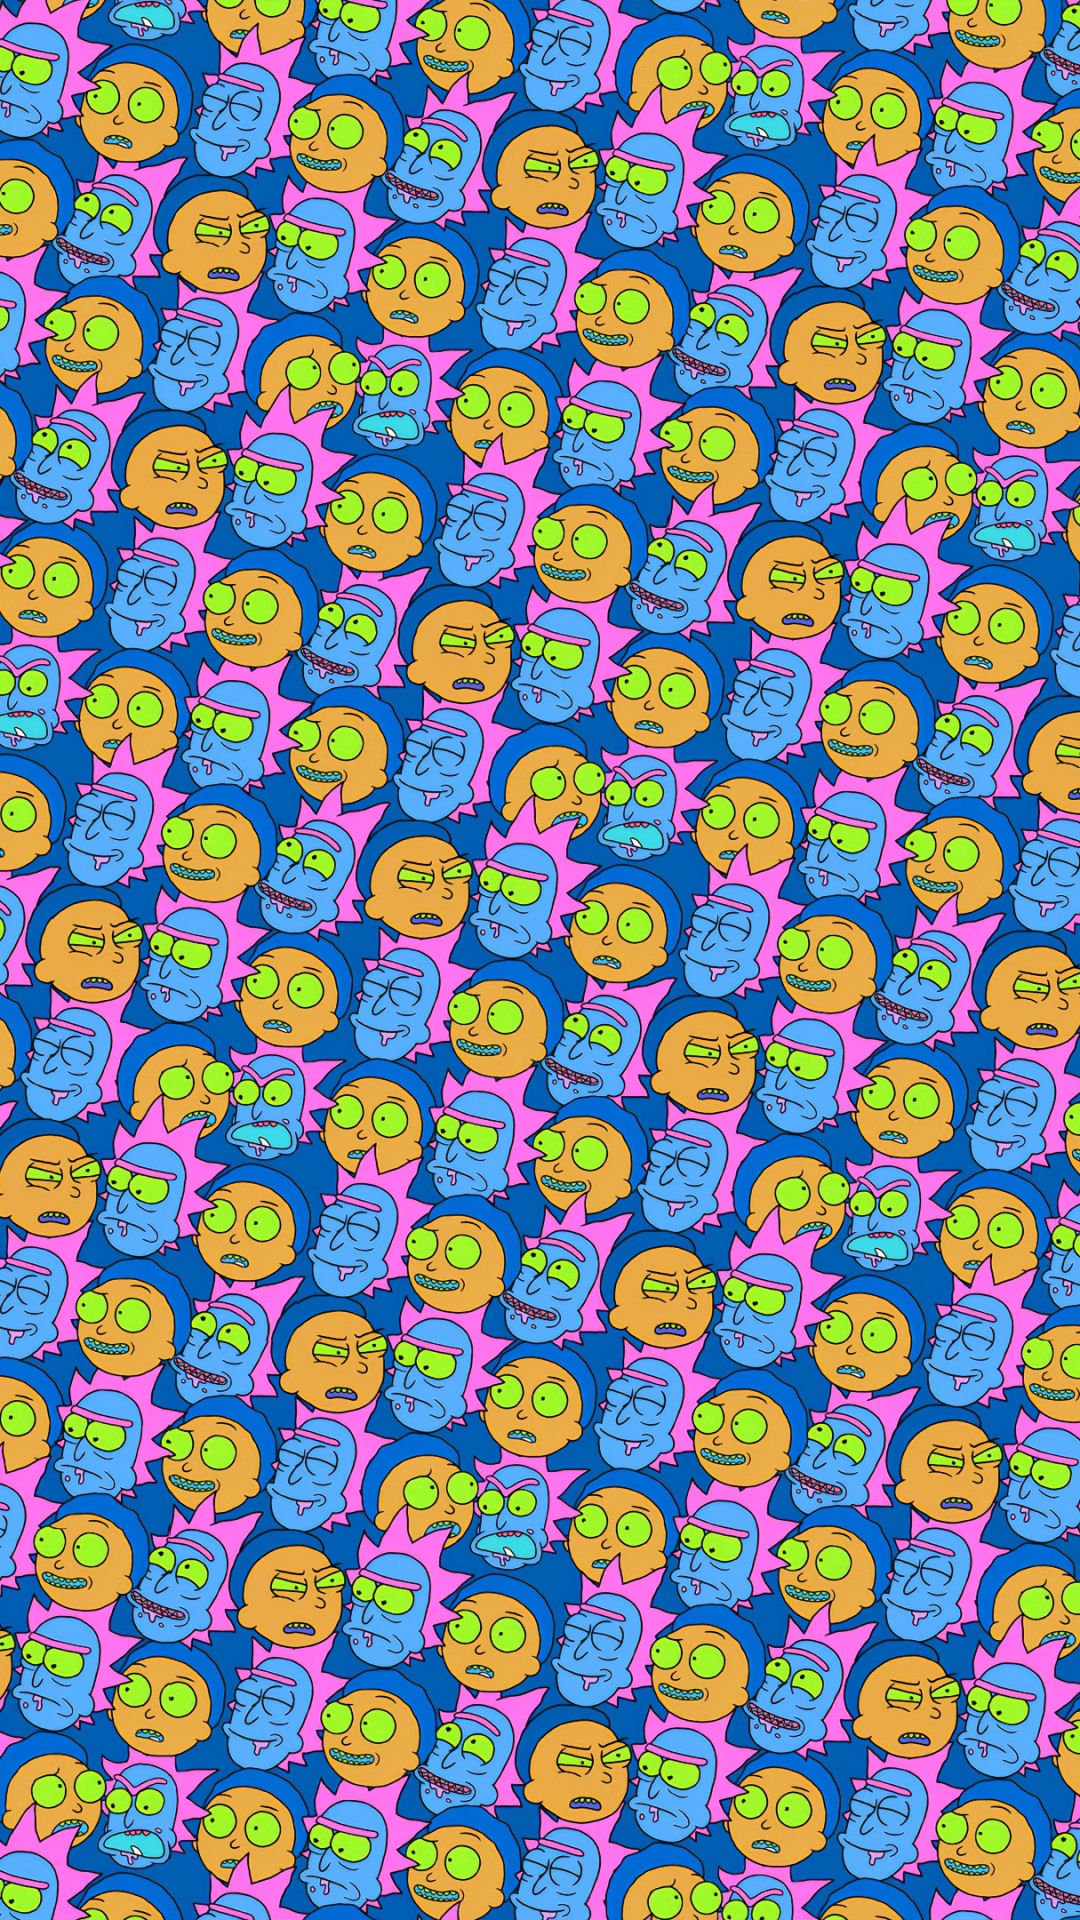 Rick and Morty Tiling Faces